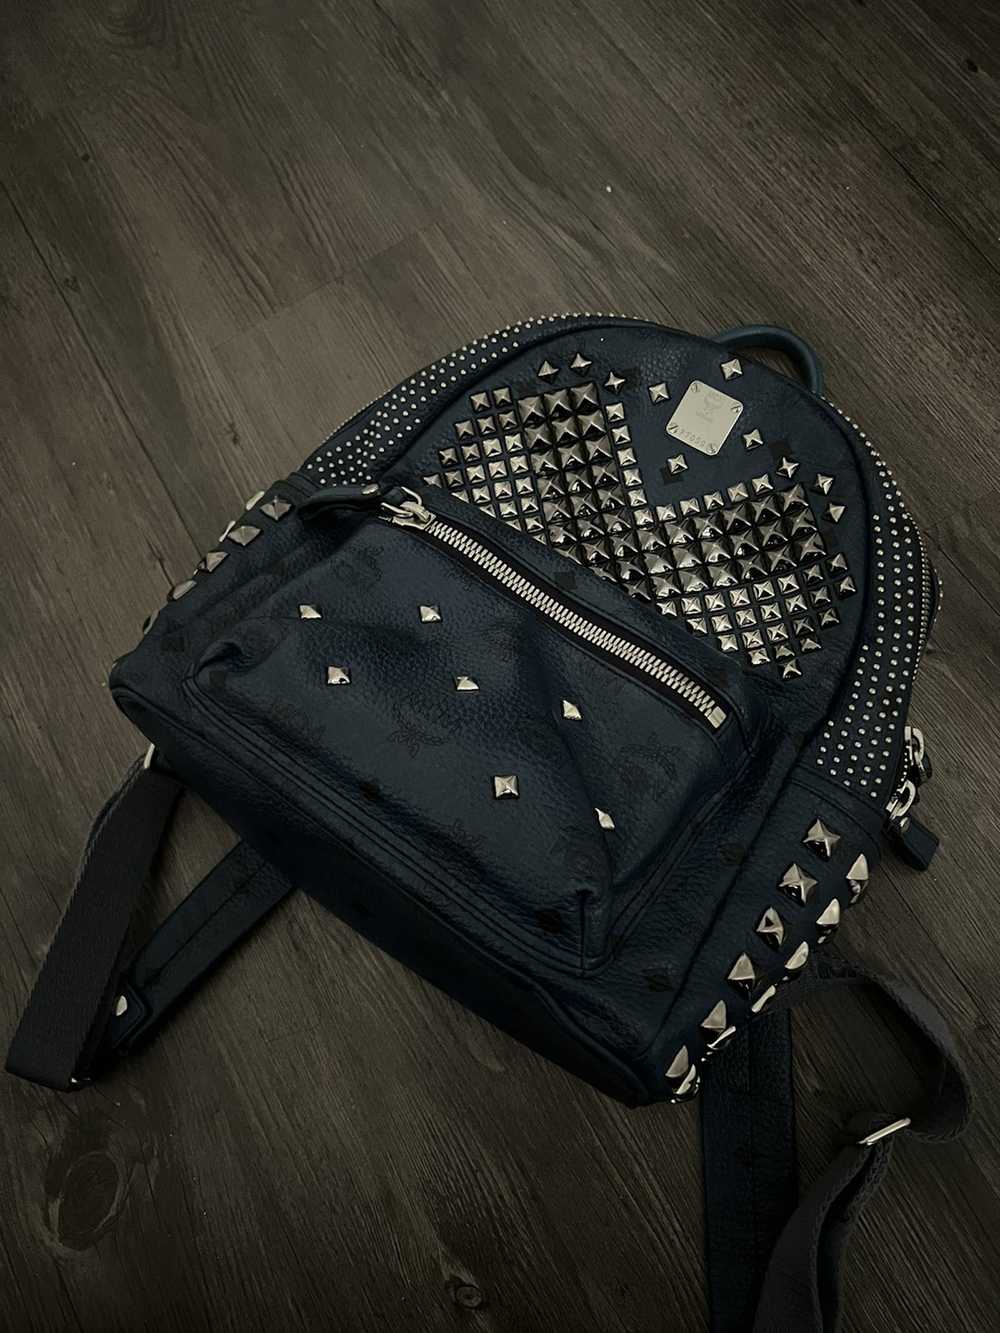 MCM Mcm small studded backpack - image 3